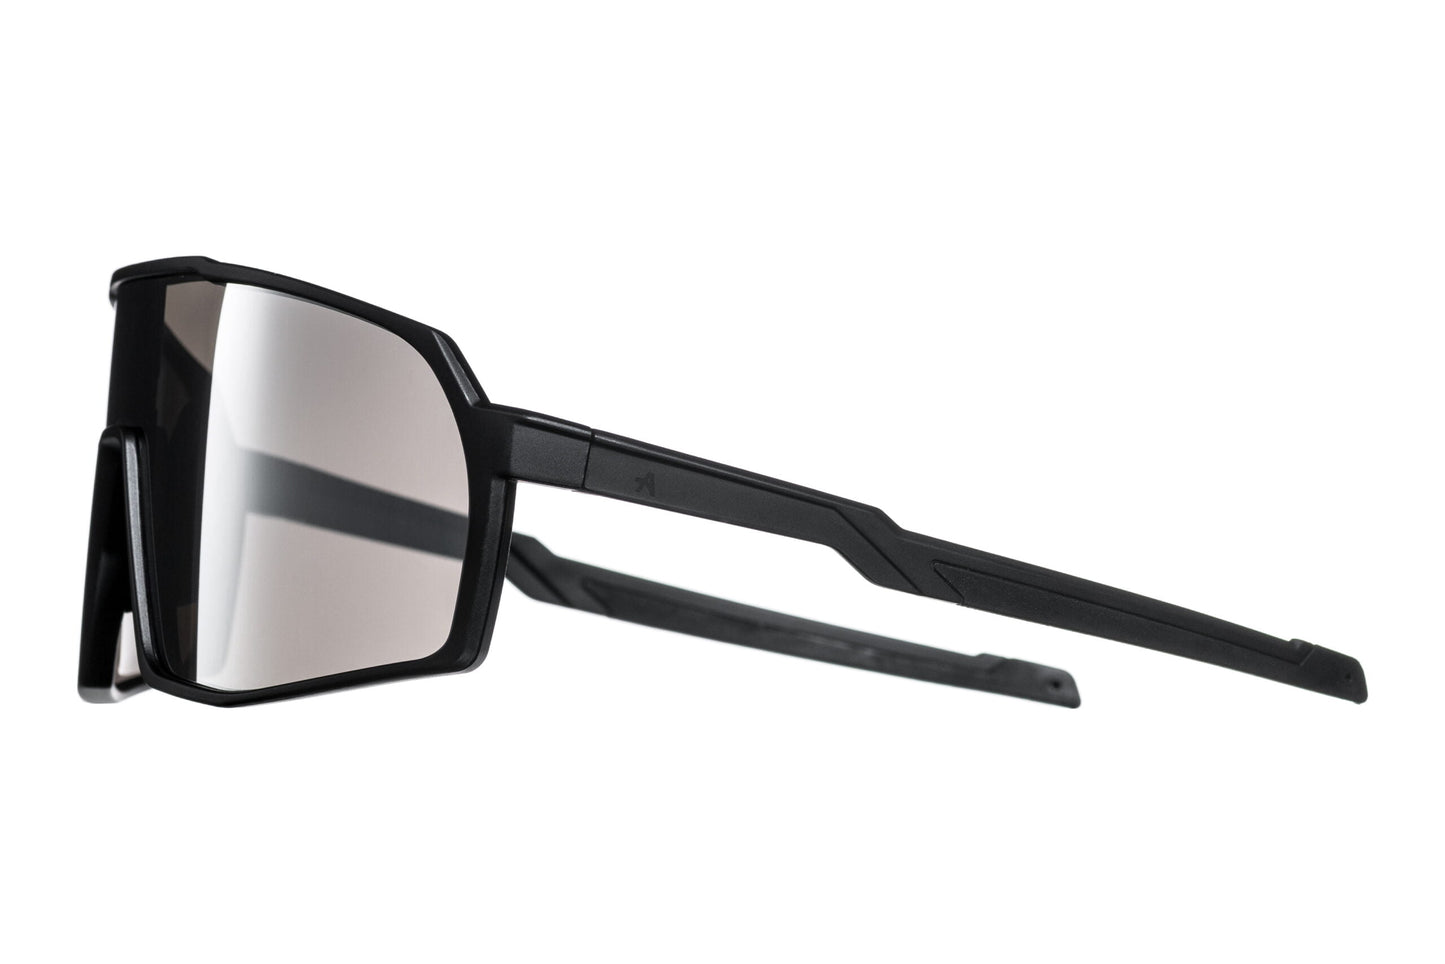 approved cycling sunglasses Vision black